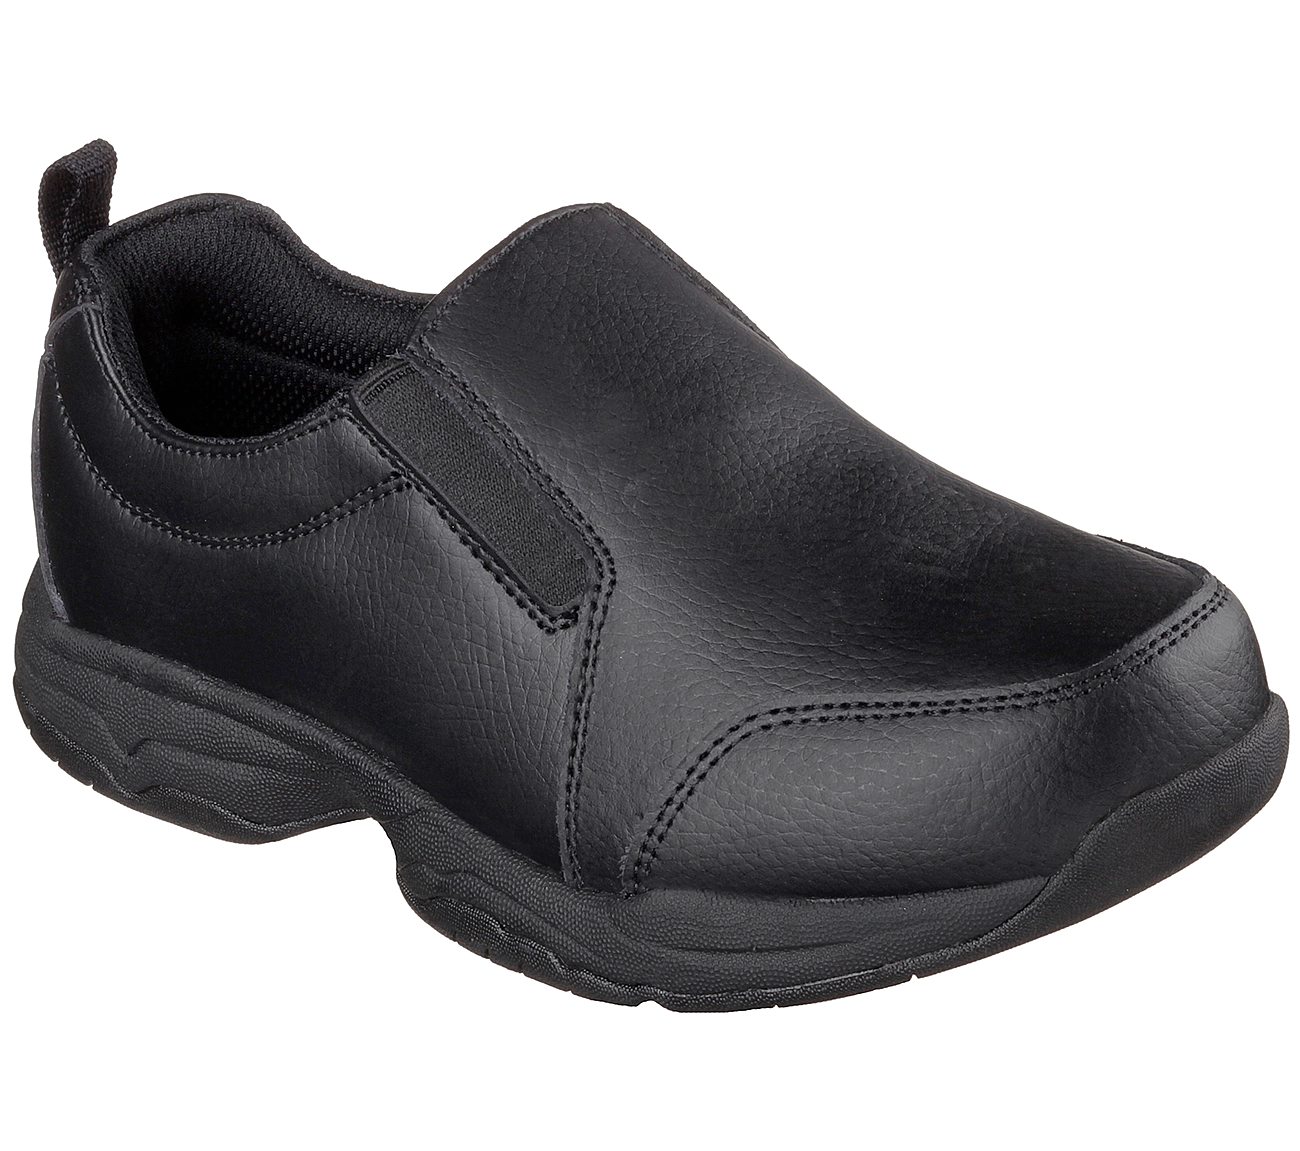 black leather comfy work shoes